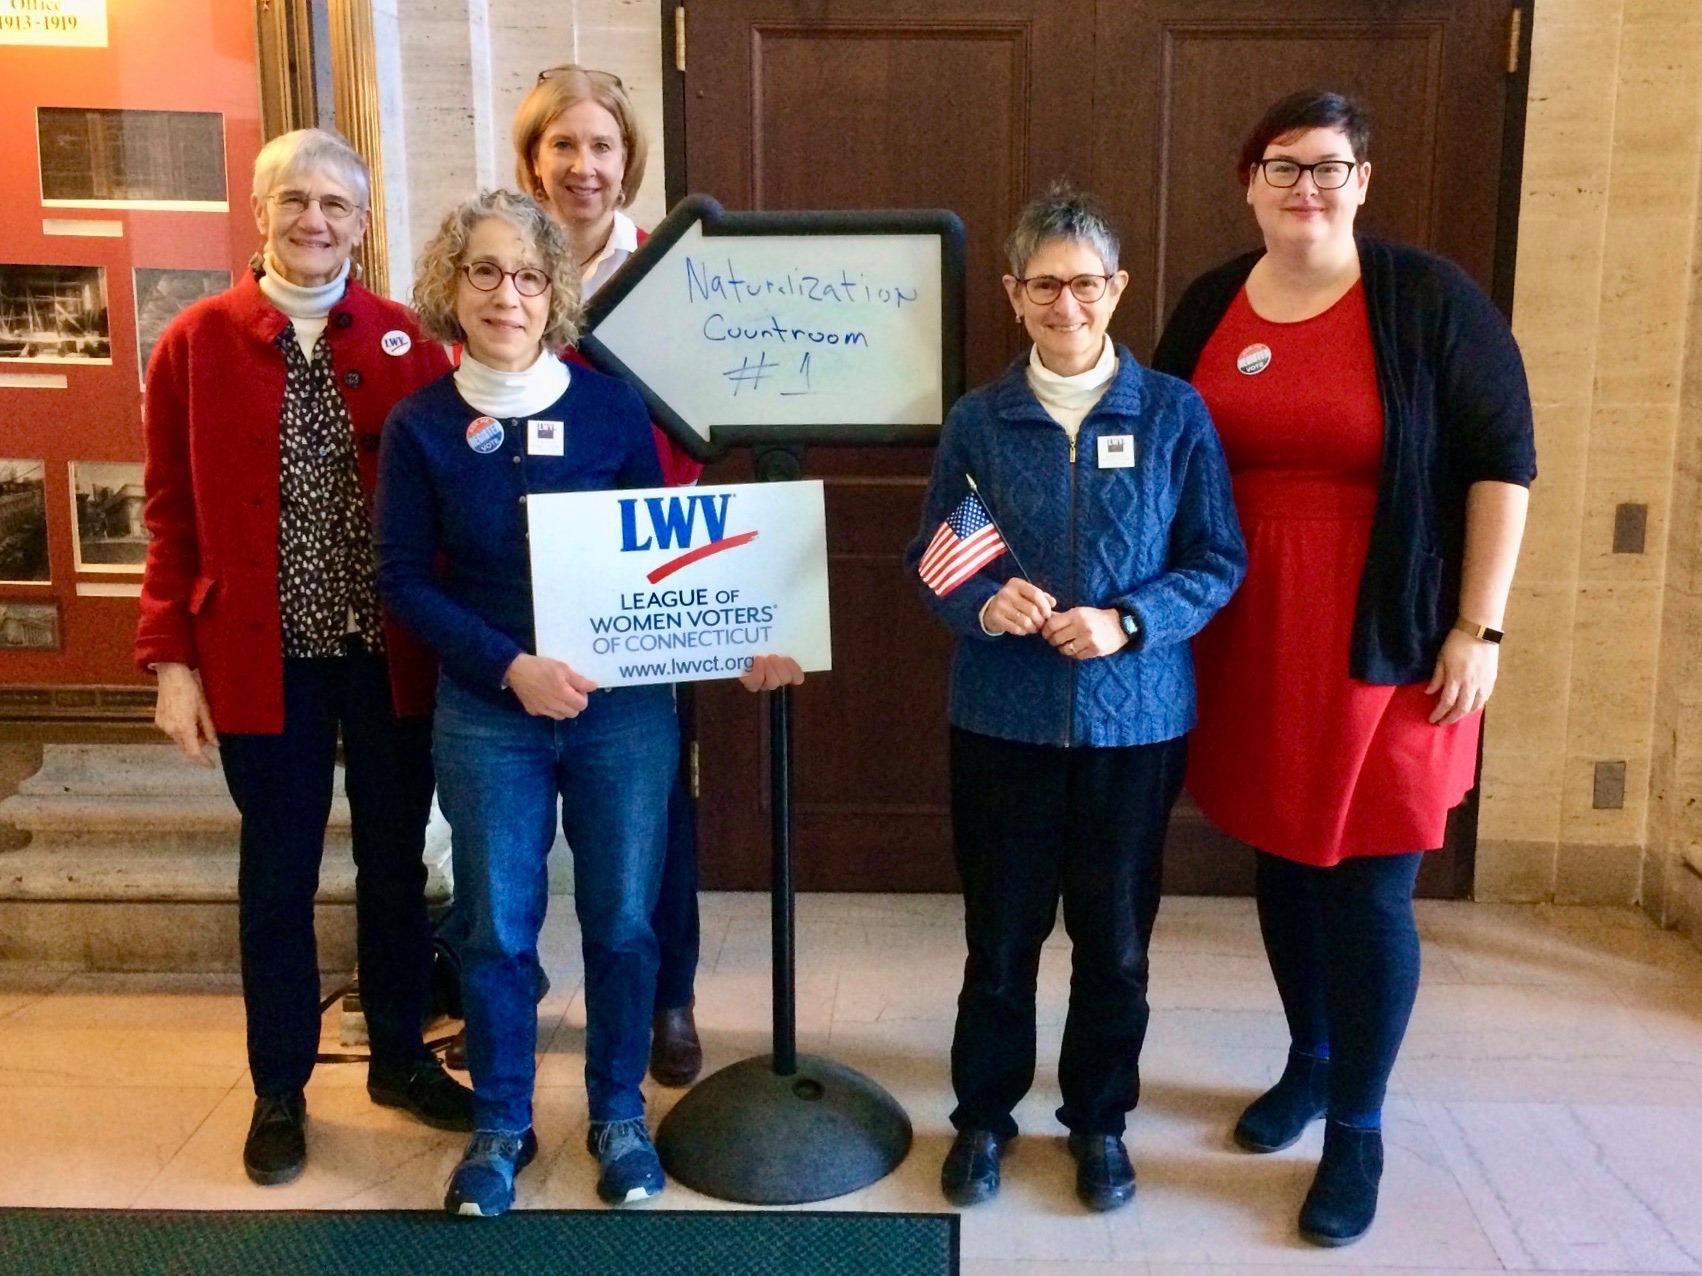 Members of the League of Women Voters of New Haven posing in the lobby of the New Haven Court House